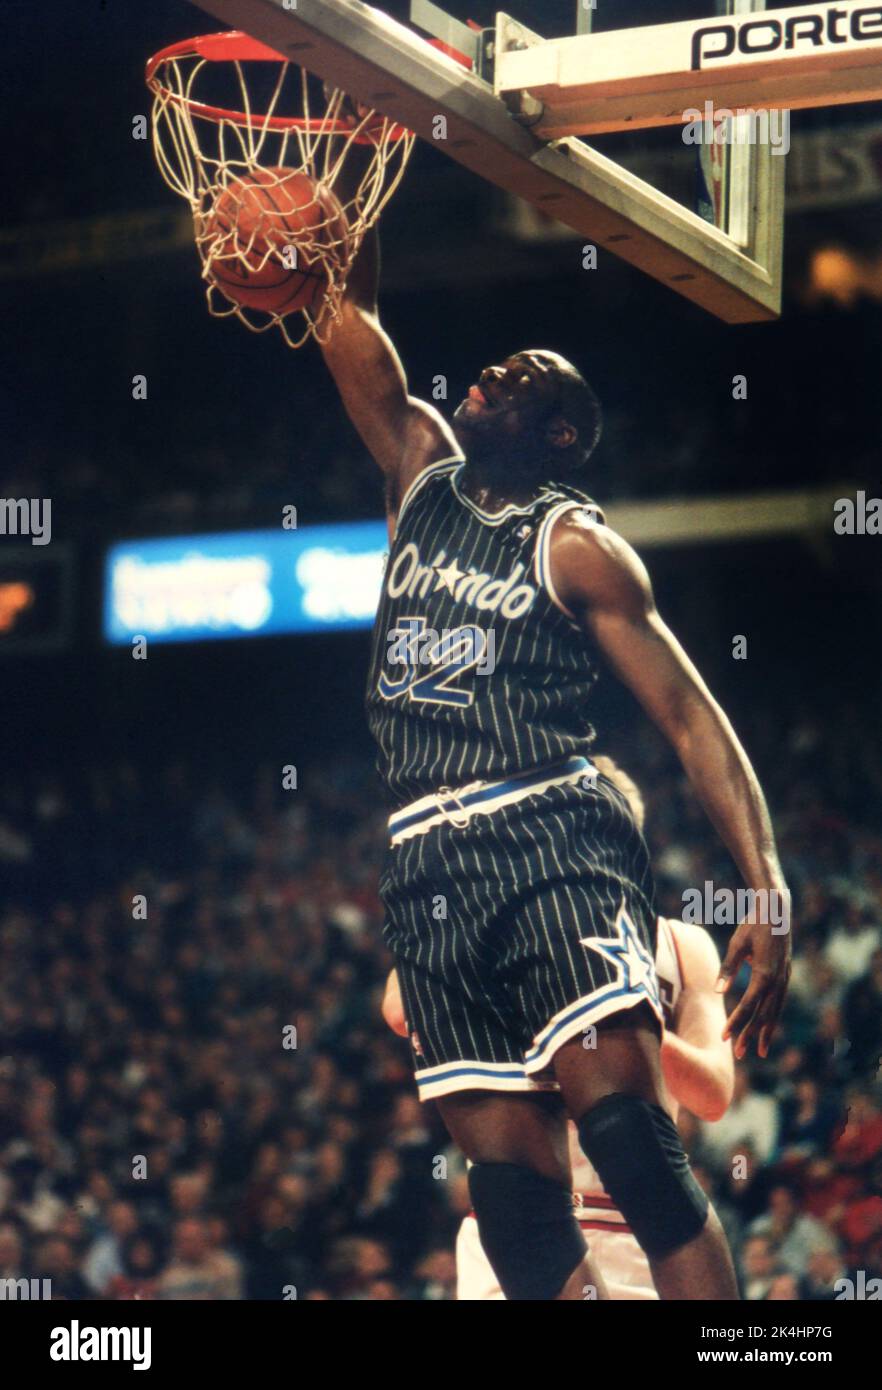 Orlando Magic center Shaquille O'Neal is shown during his rookie year during a game in Chicago against the Bulls. in 1992. Stock Photo